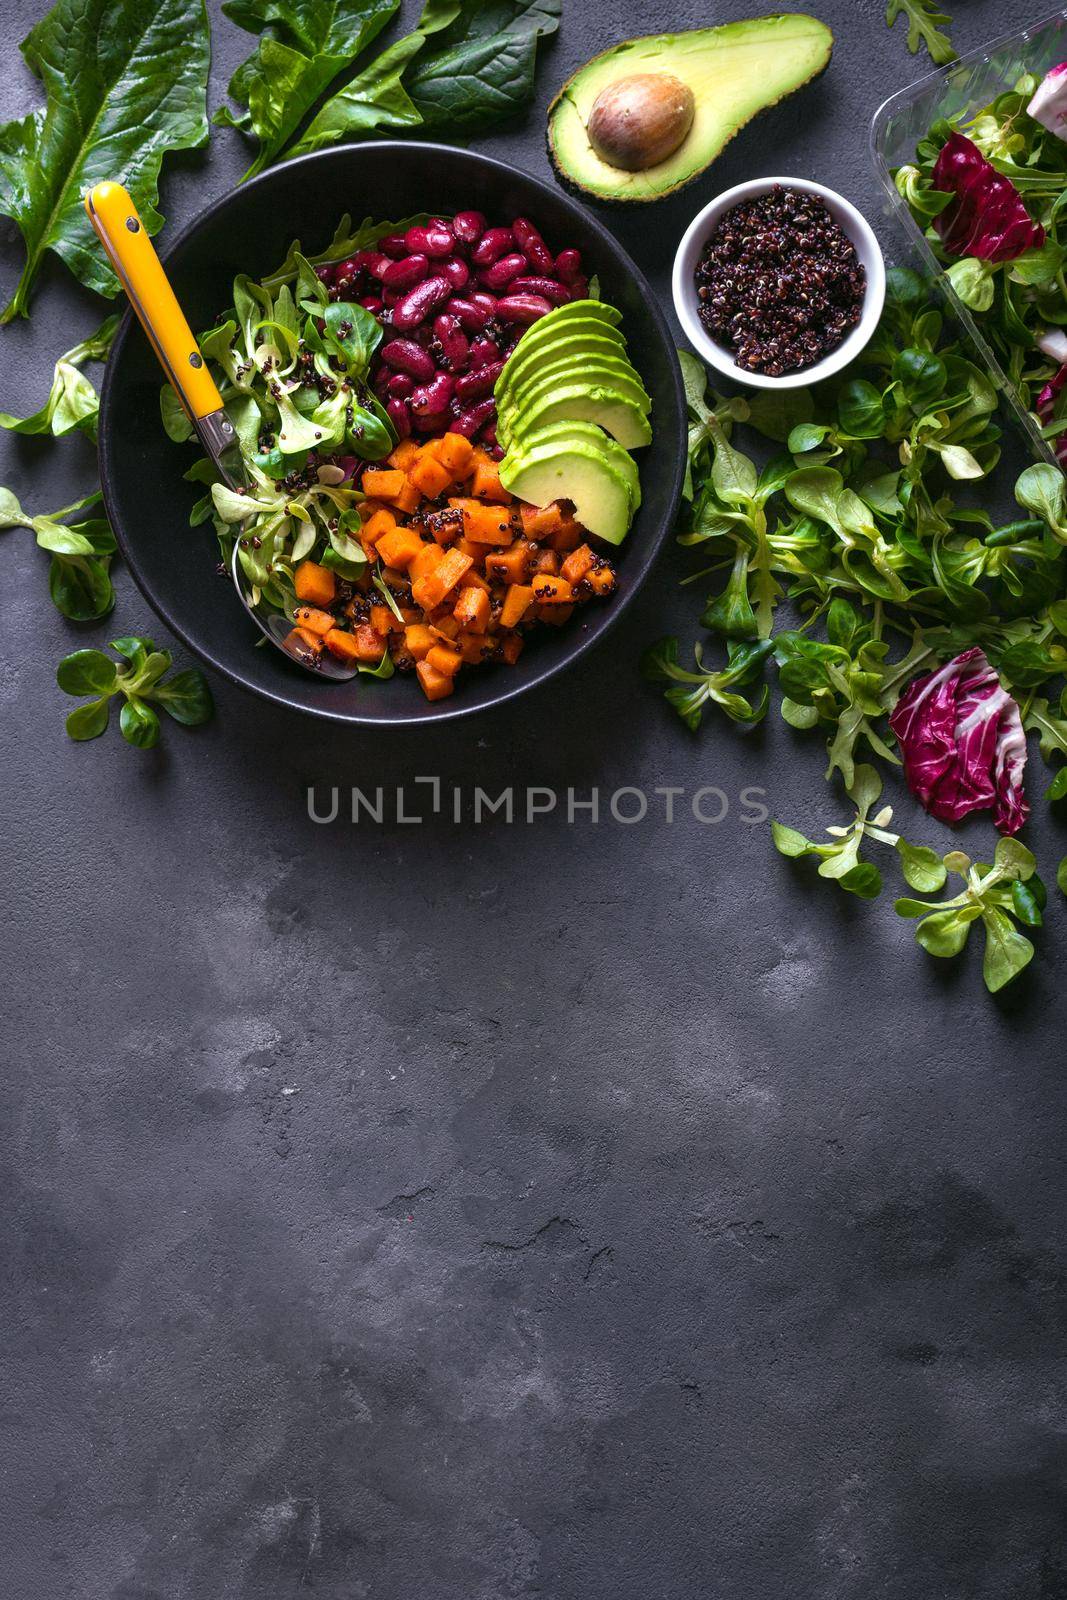 Quinoa salad in bowl with avocado, sweet potato, beans, herbs, spinat on concrete rustic background. Quinoa superfood concept. Clean healthy detox eating. Vegan/vegetarian food. Making healthy salad